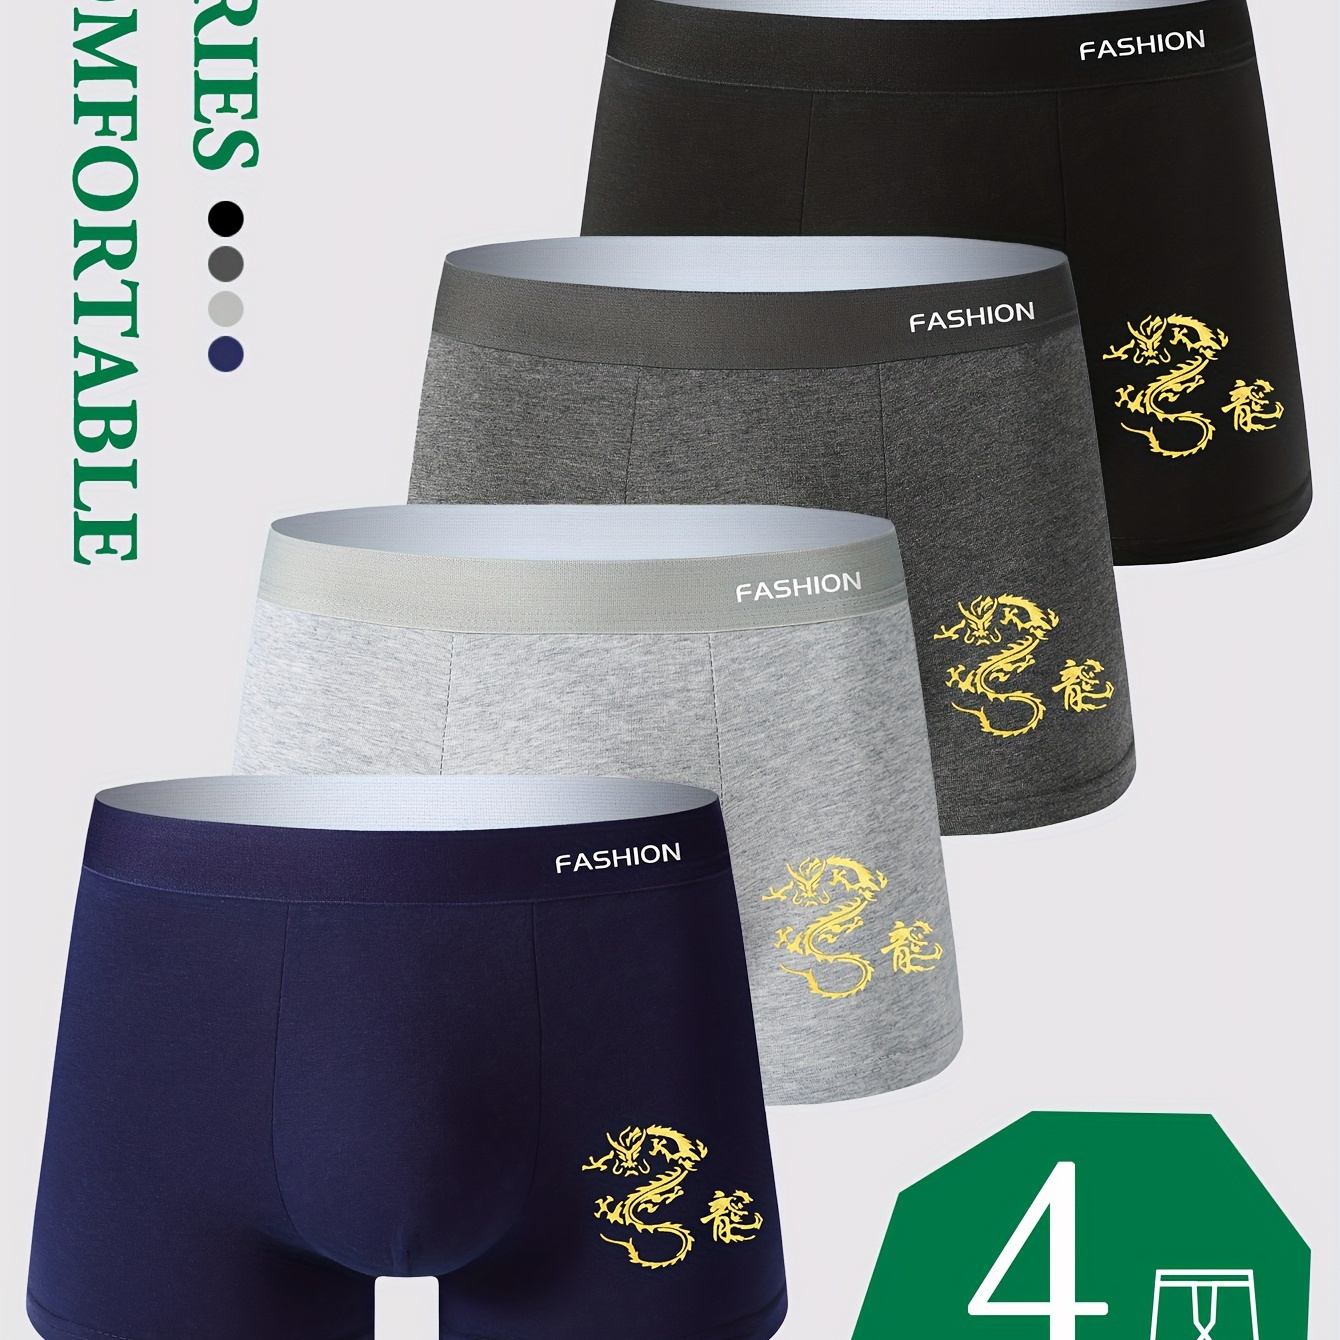 

4pcs Men's Antibacterial & Sweat-absorbing Boxer Briefs, Youth Breathable Comfy Boxer Trunks, Elastic Sports Shorts, Men's Casual Underwear Daily Wear